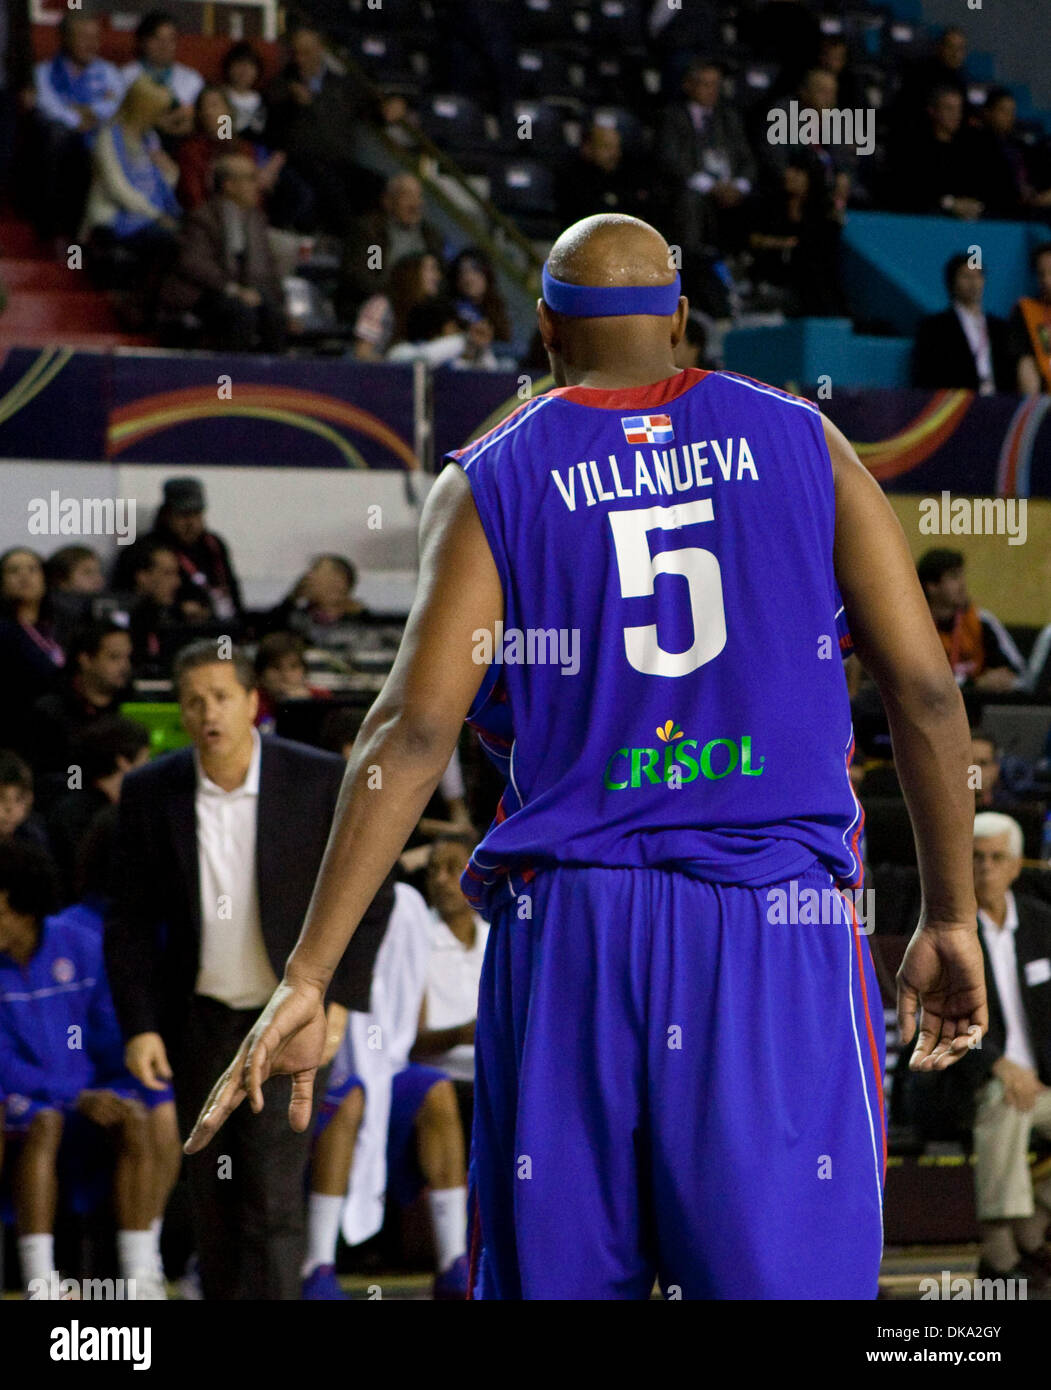 Sept. 10, 2011 - Mar del Plata, Buenos Aires, Argentina - The Dominican Republic's CHARLIE VILLANUEVA receives instruction from coach JOHN CALIPARI during the FIBA Americas 2011 semi-final basketball match between The Dominican Republic and Brazil. Brazil won the match 83-76, qualifying for the 2012 Olympics in London. (Credit Image: © Ryan Noble/ZUMApress.com) Stock Photo